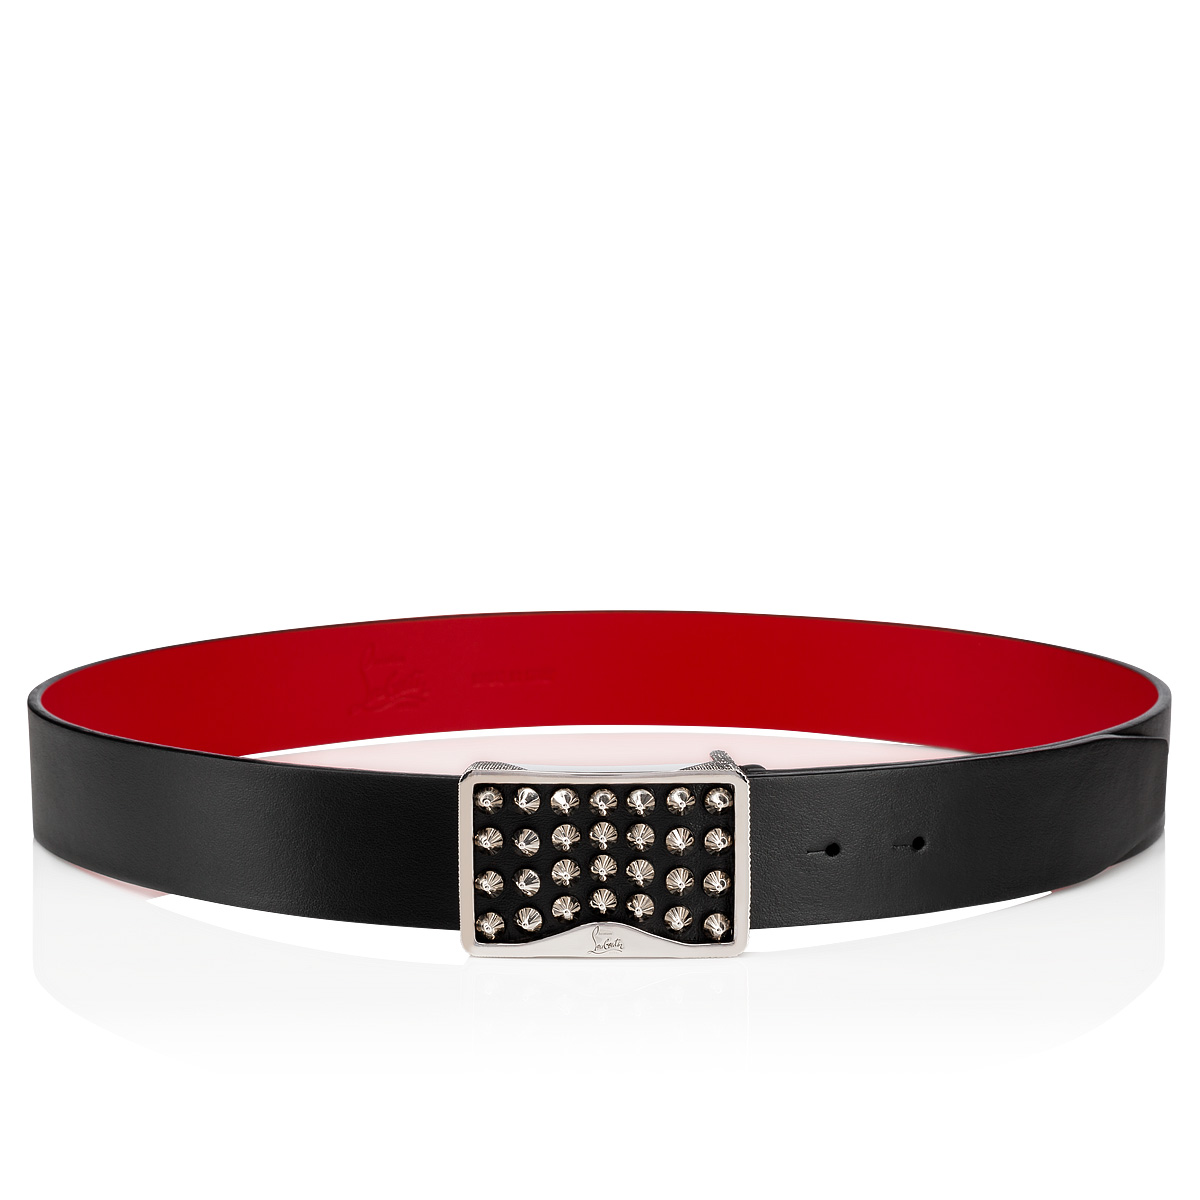 Louis - Belt - Calf leather and spikes - Black - Christian Louboutin